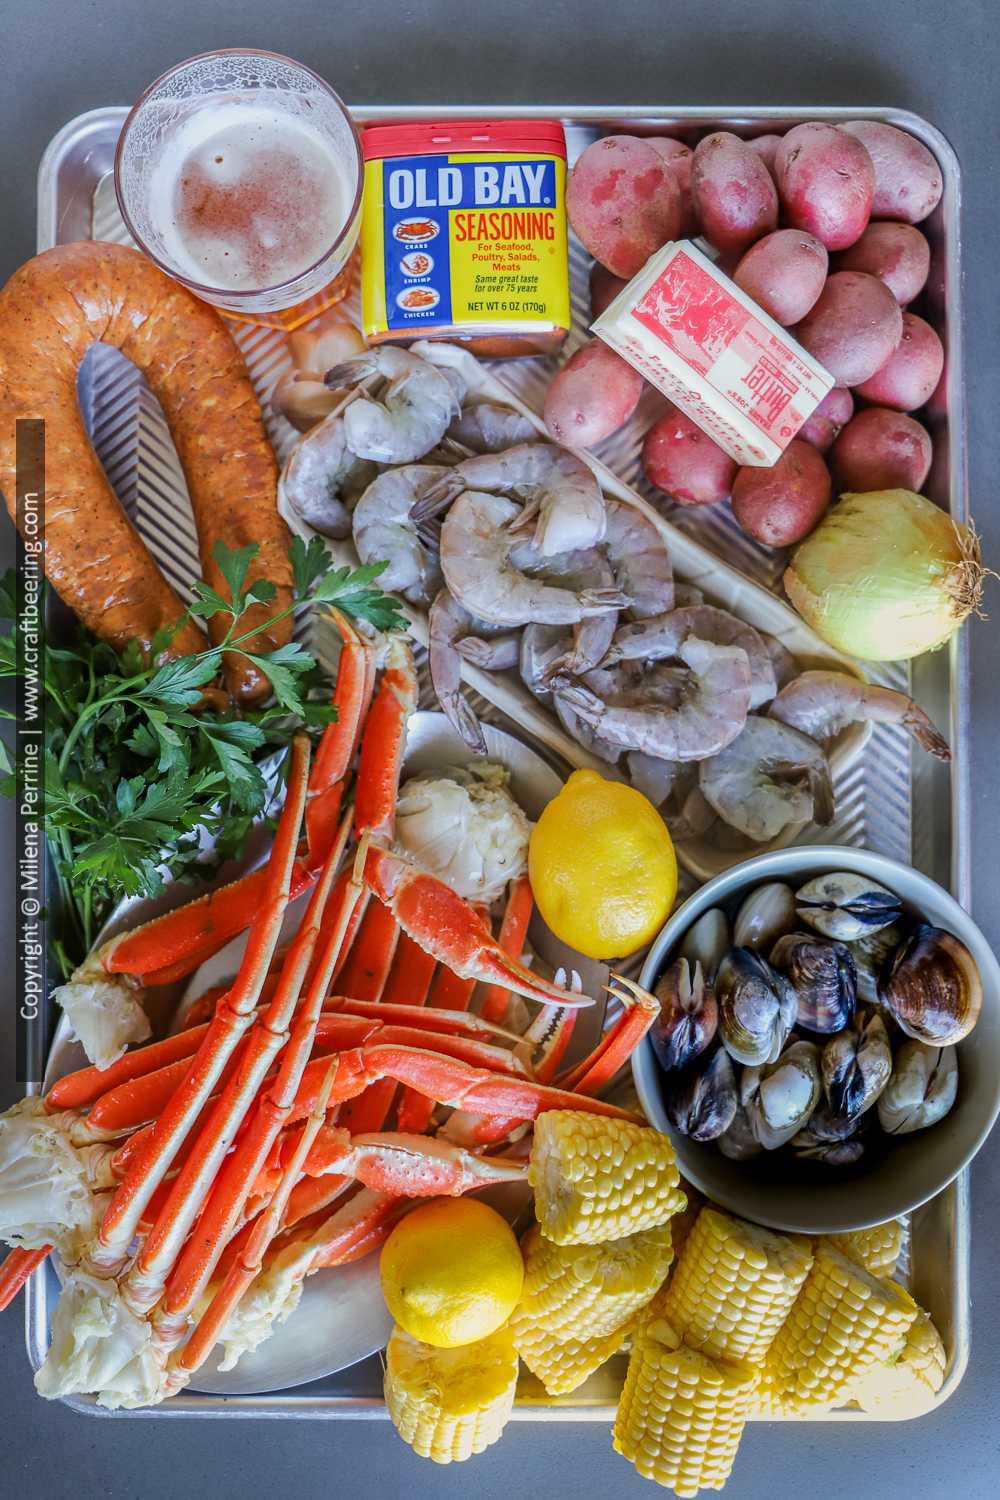 Ingredients for sea food boil bag - snow crab clusters, shrimp, clams, sausage, red potatoes, corn, onions, spices, Old Bay seasoning, parsley, lemons, butter, beer.